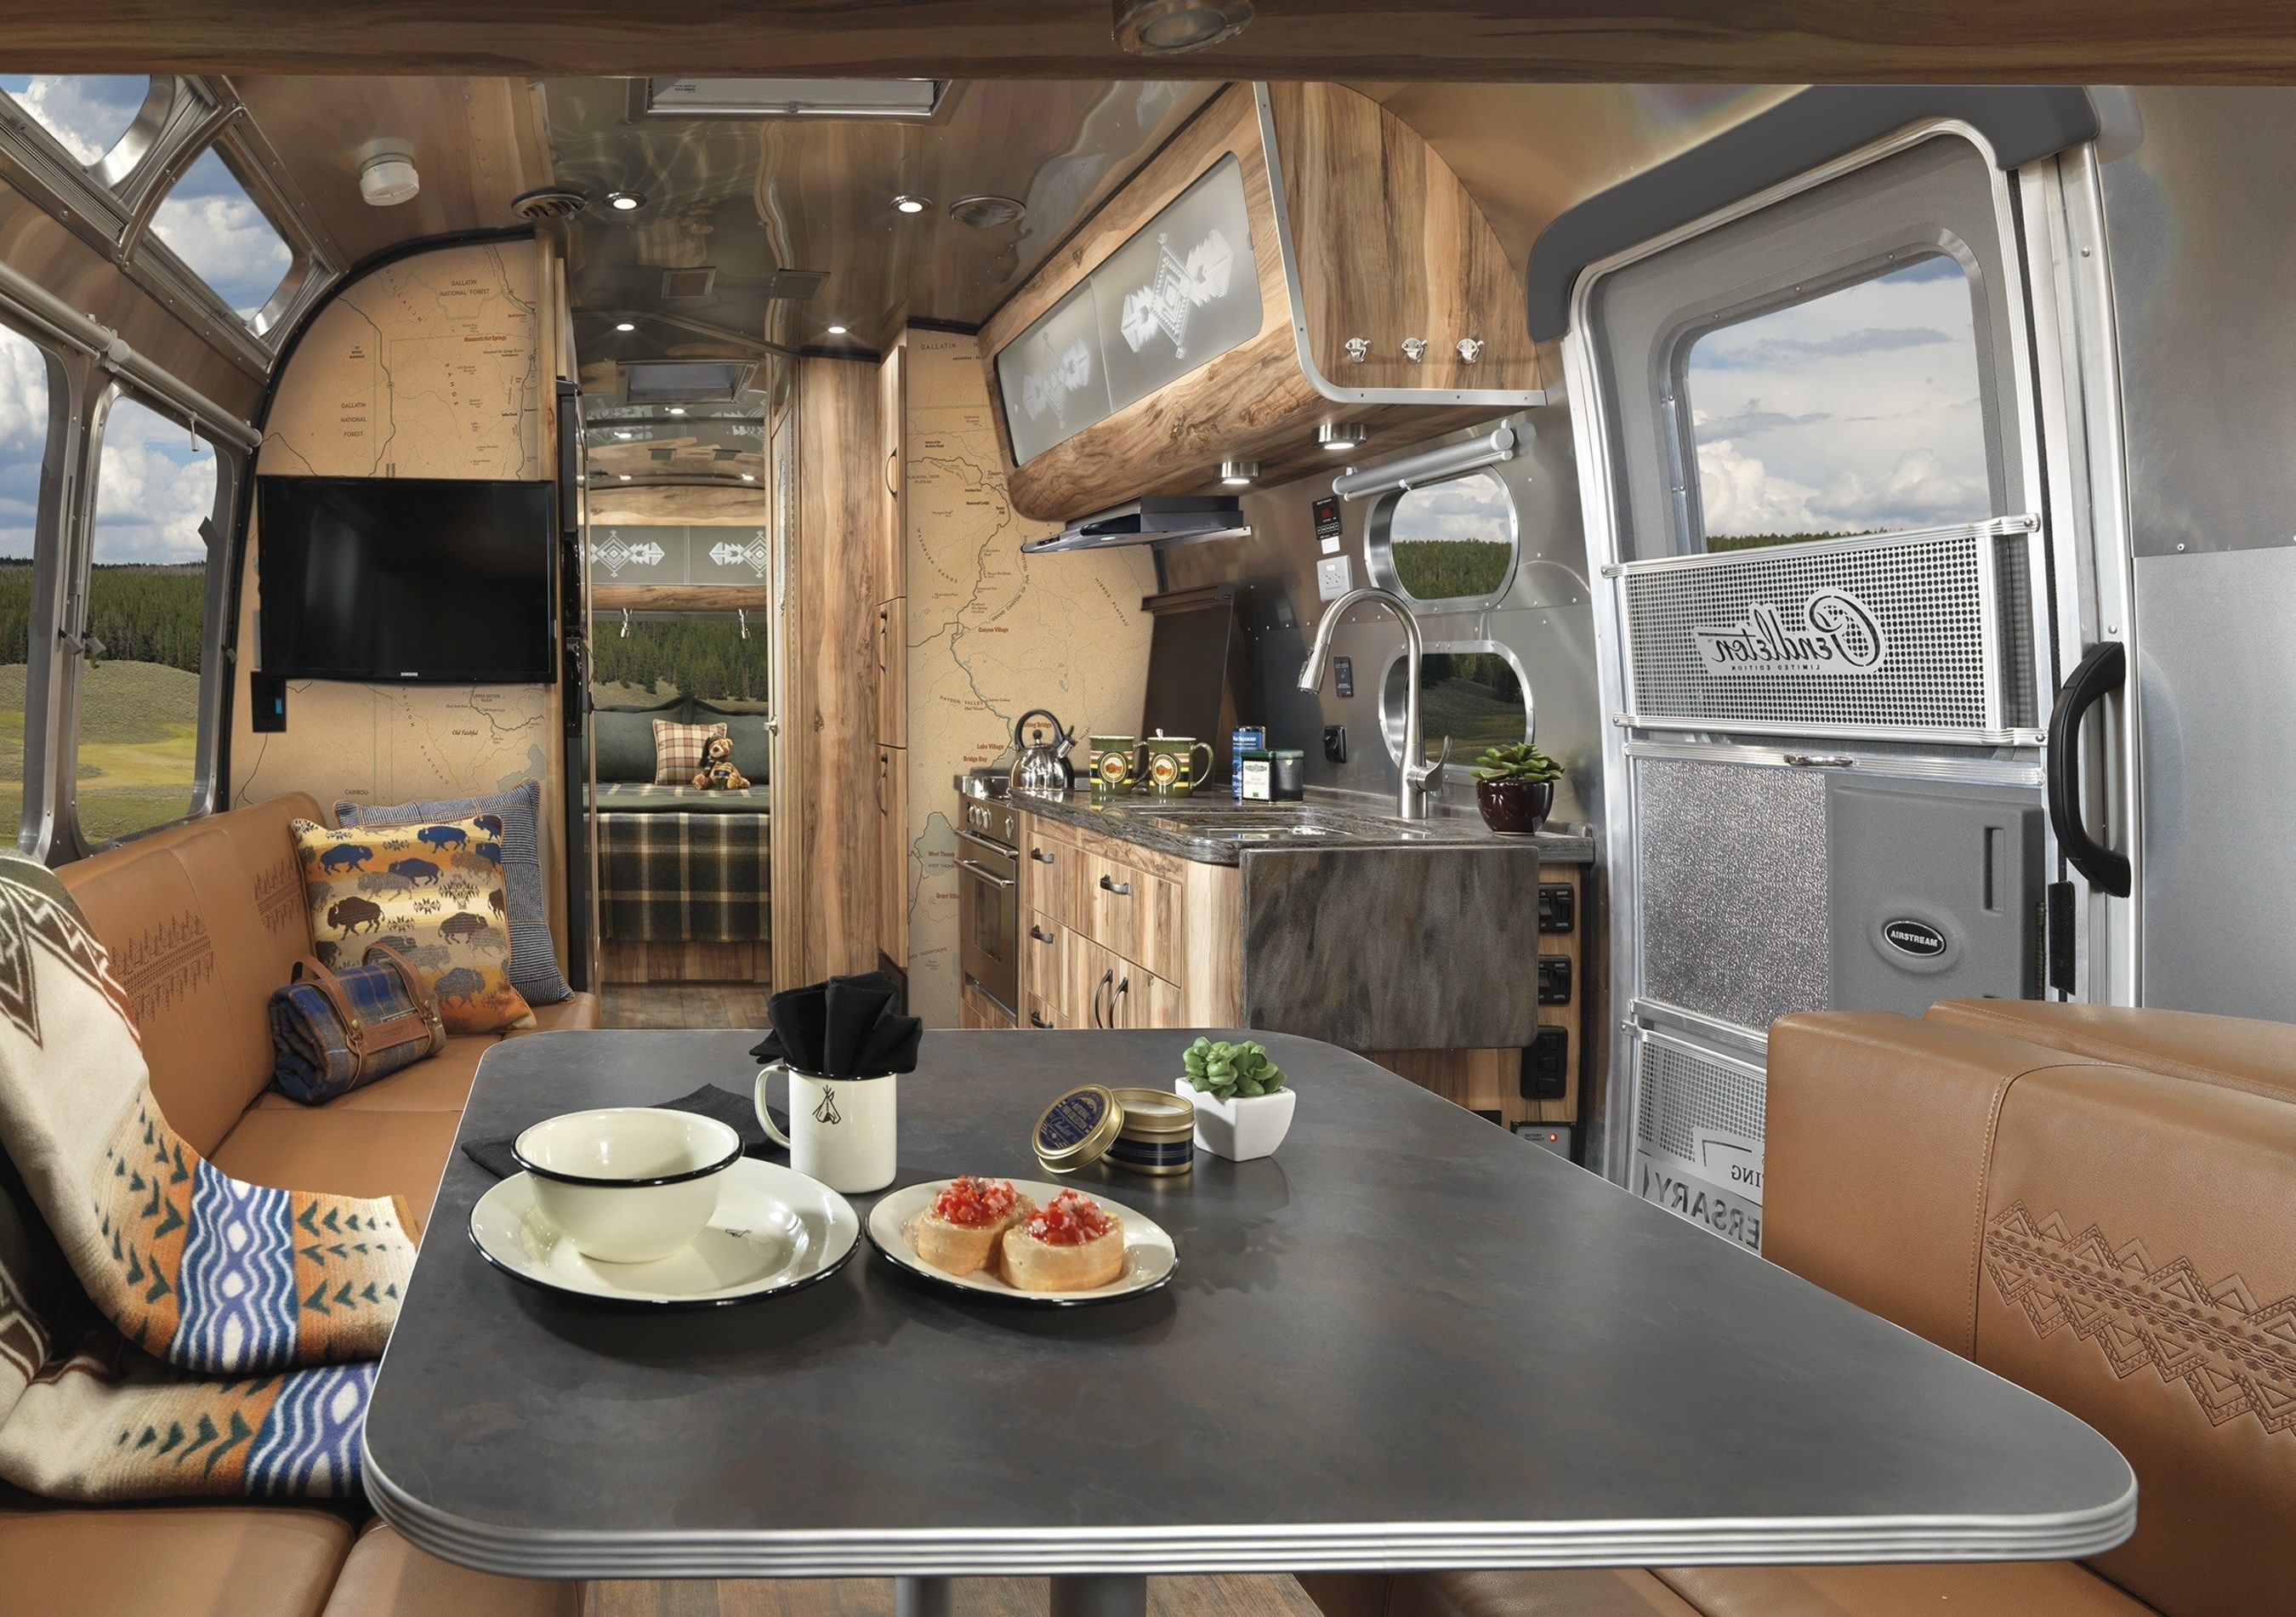 Two timeless American brands, Airstream and Pendleton Woolen Mills, have come together for the first time to pay tribute to our nation's parks and to great outdoor adventure. Coinciding with the centennial of the National Park Service, Airstream proudly introduces the 2016 Limited Edition Pendleton National Park Foundation travel trailer.